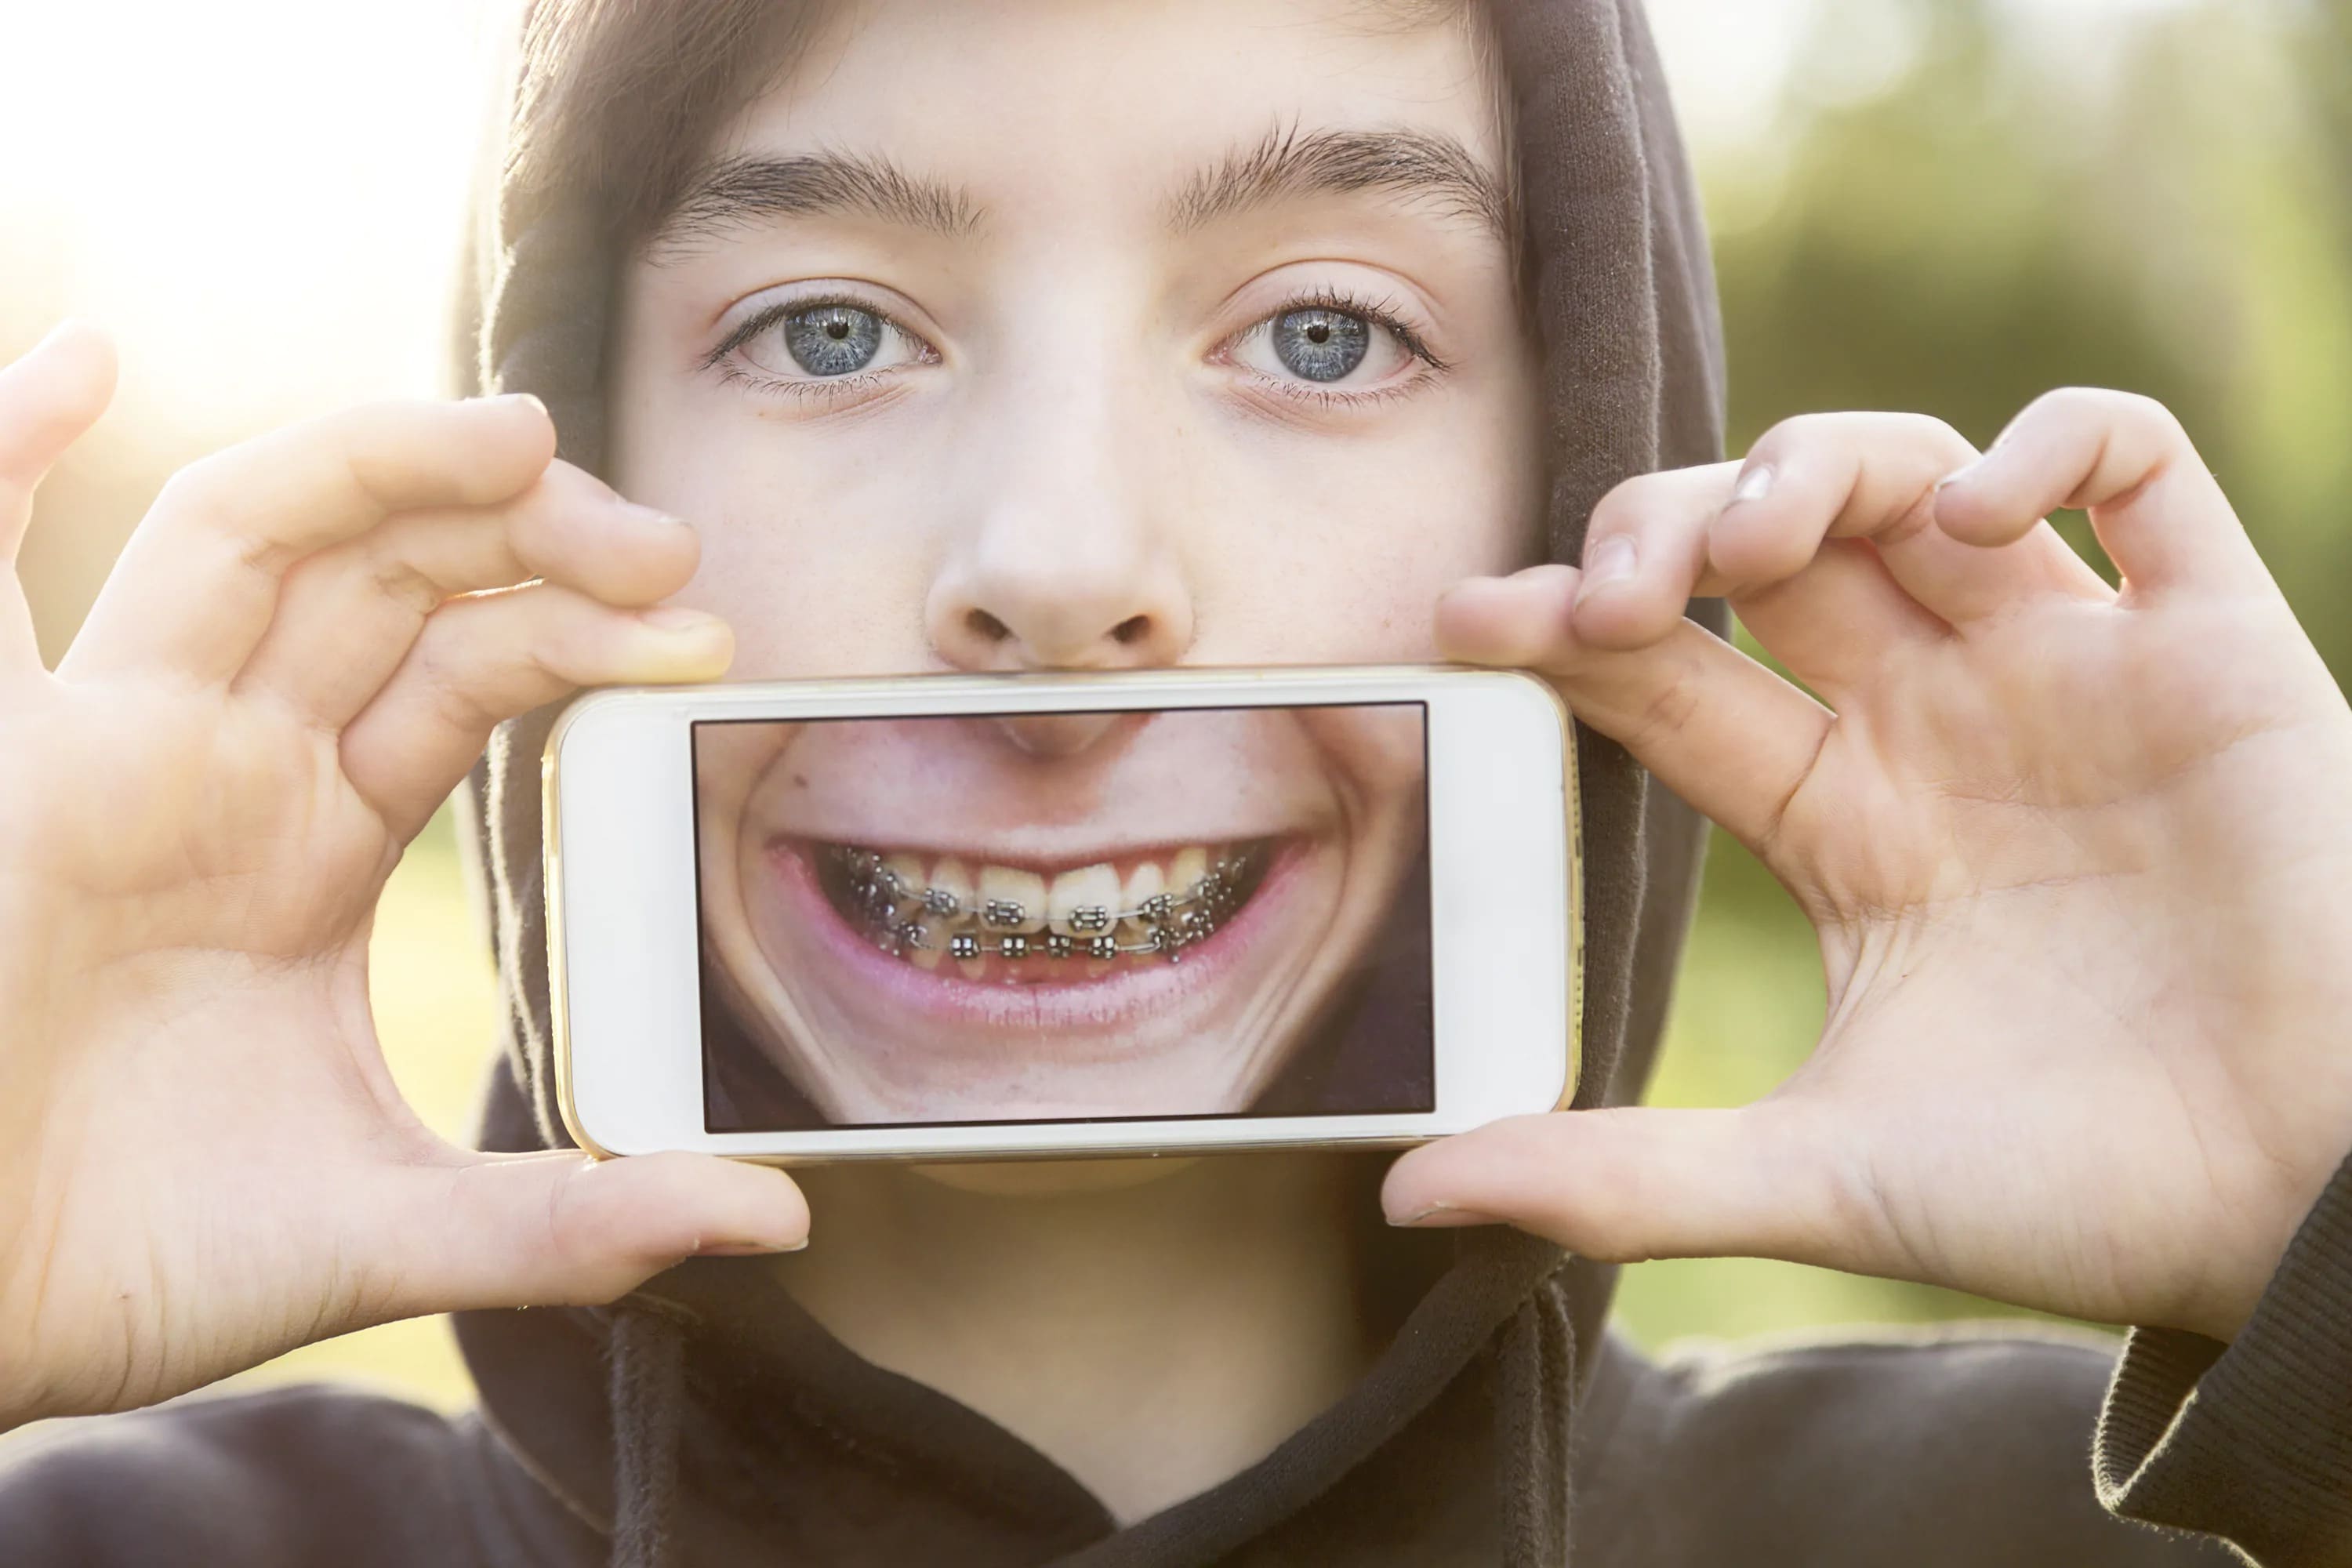 Cost of Braces in Canada: What You Need To Know